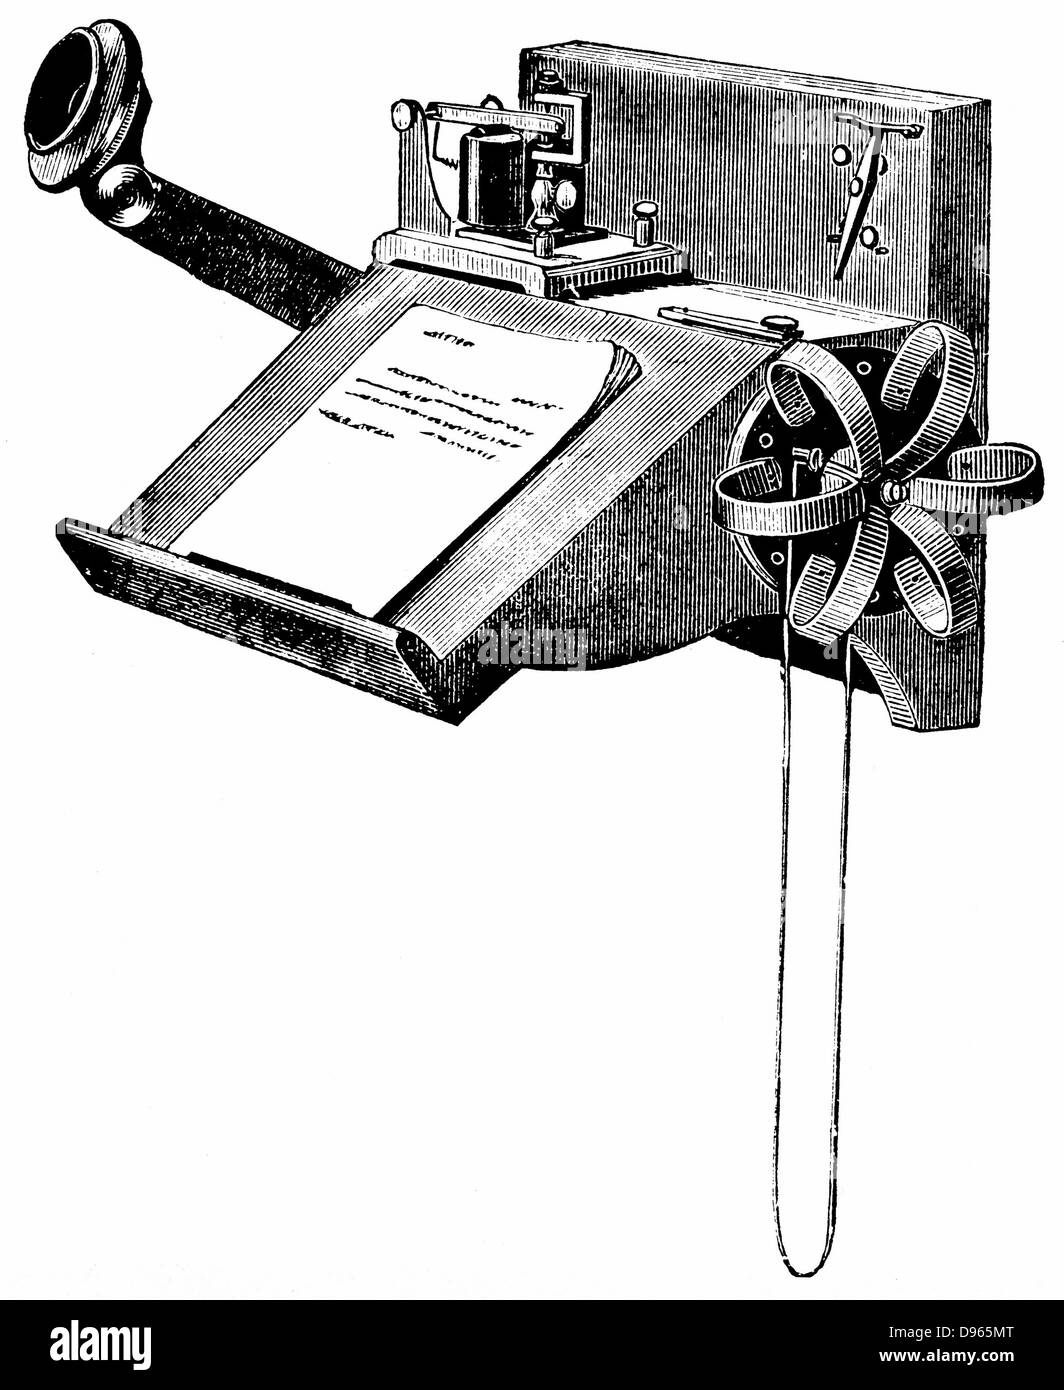 Edison carbon telephone: Wall-mounted model with 'pony-crown' receiver (right). Wood engraving, New York, 1879 Stock Photo